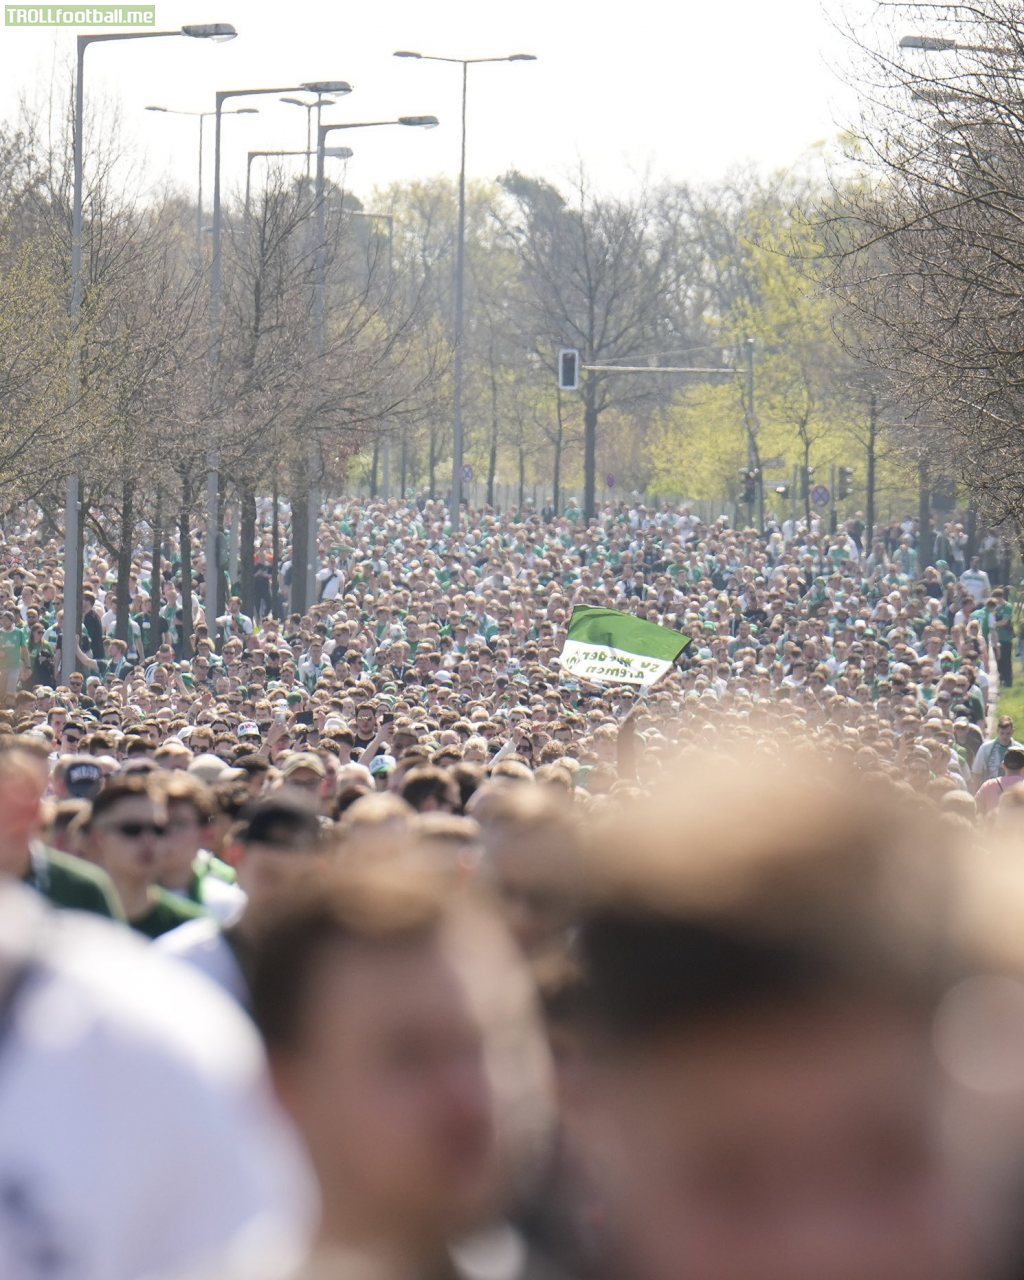 The sheer amount of Werder fans before the "away" game in Berlin